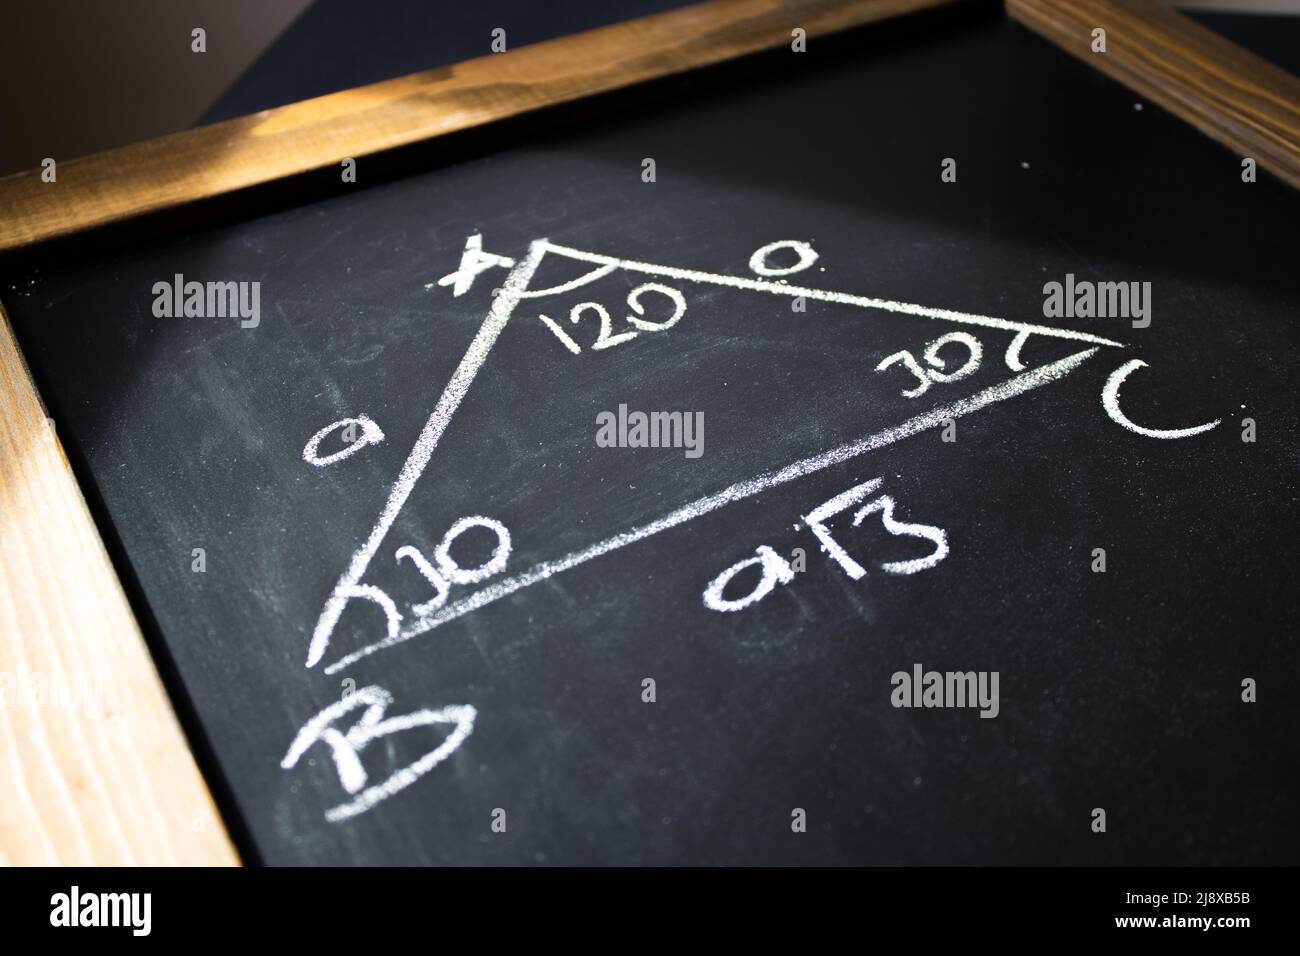 120/30/30 special triangle on the chalkboard Stock Photo